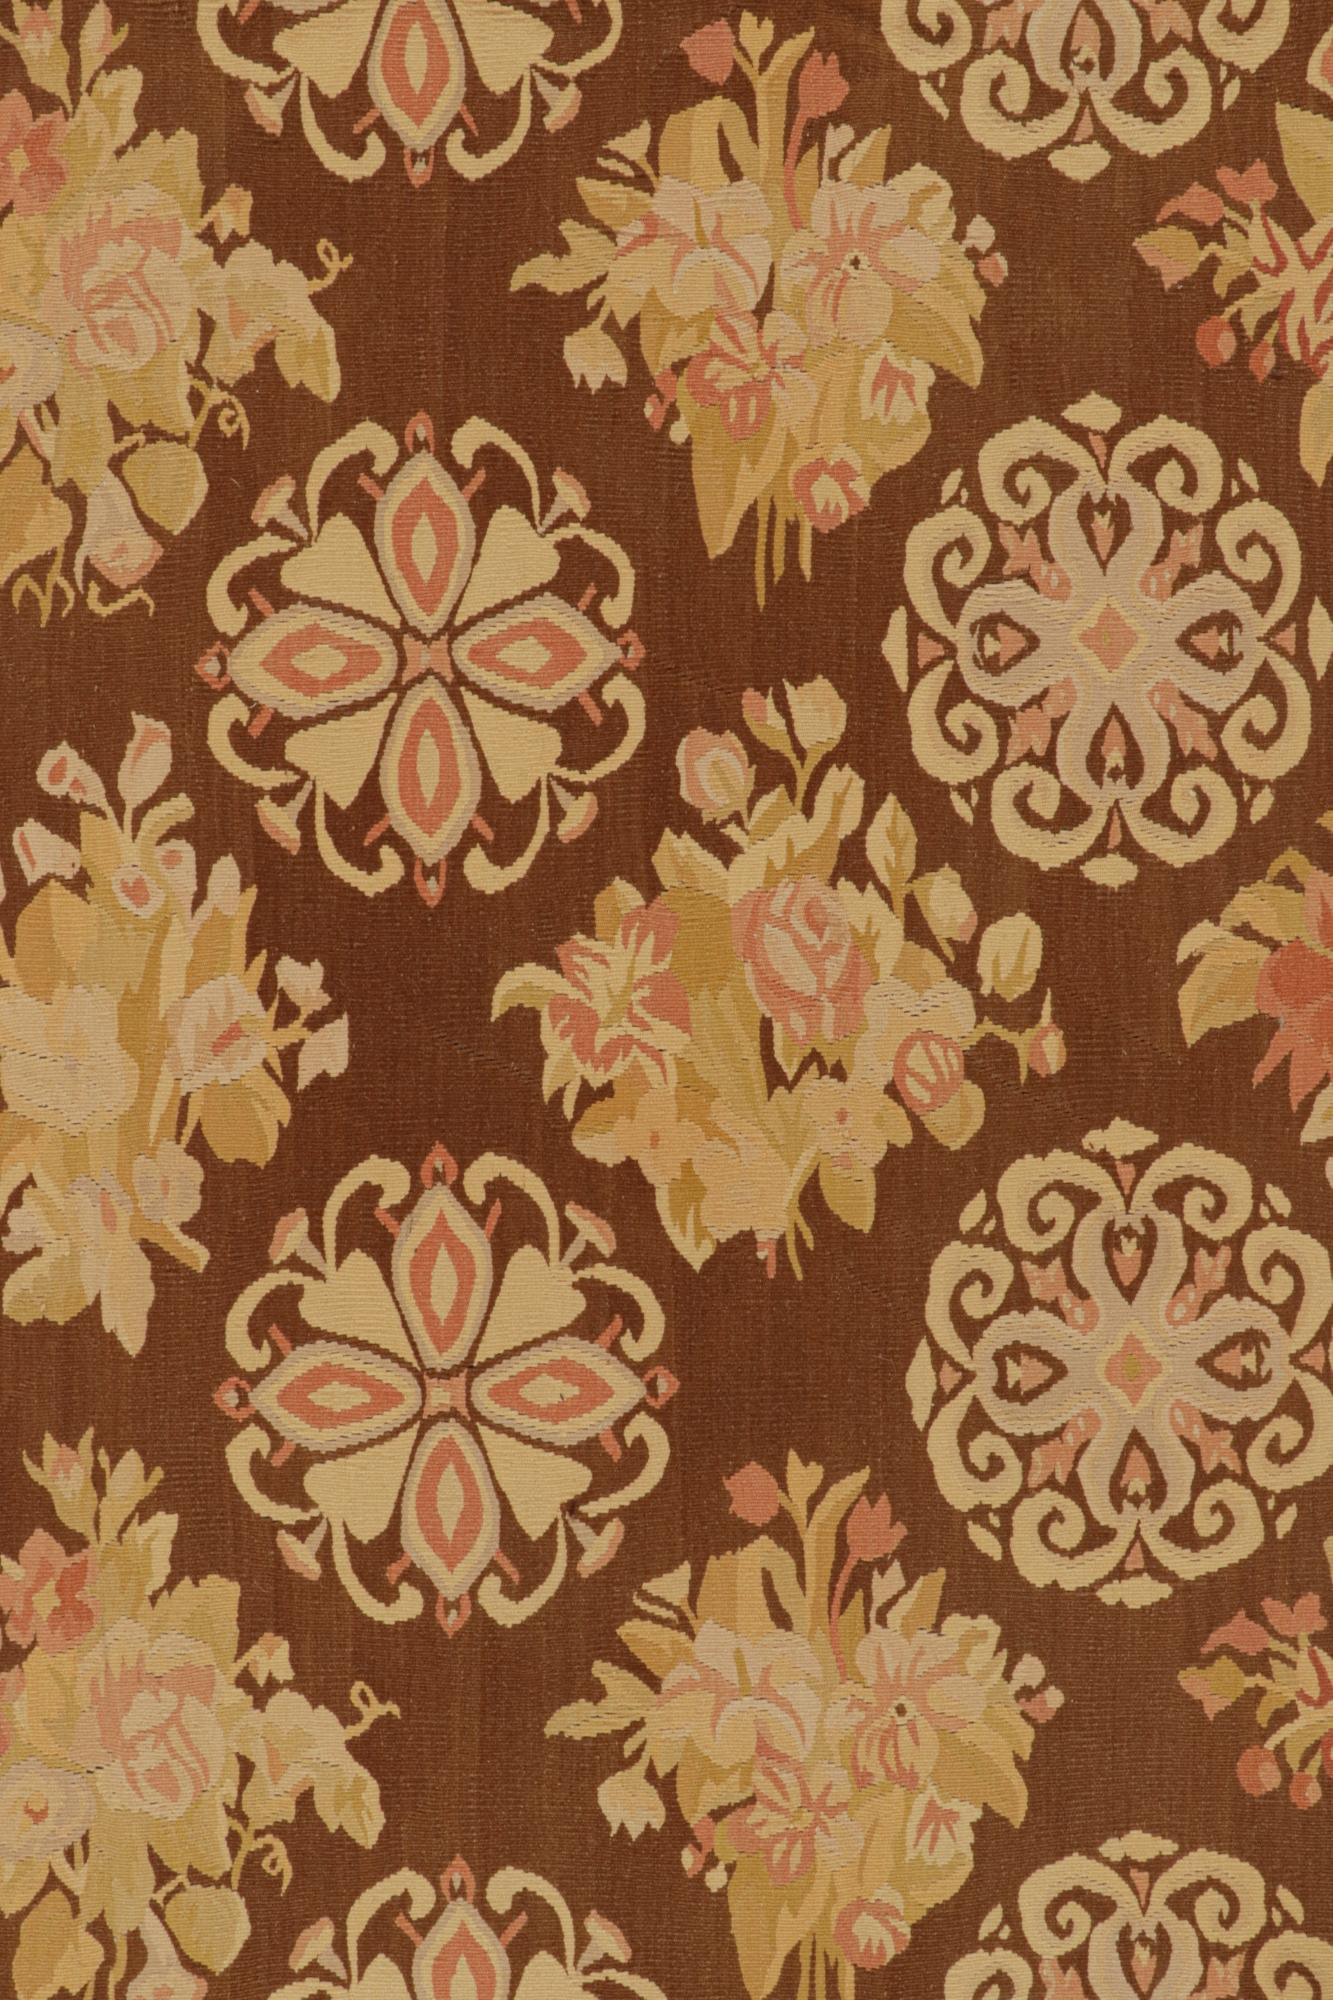 Chinese Rug & Kilim’s Aubusson Flatweave Style Rug in Brown with Beige Floral Patterns For Sale